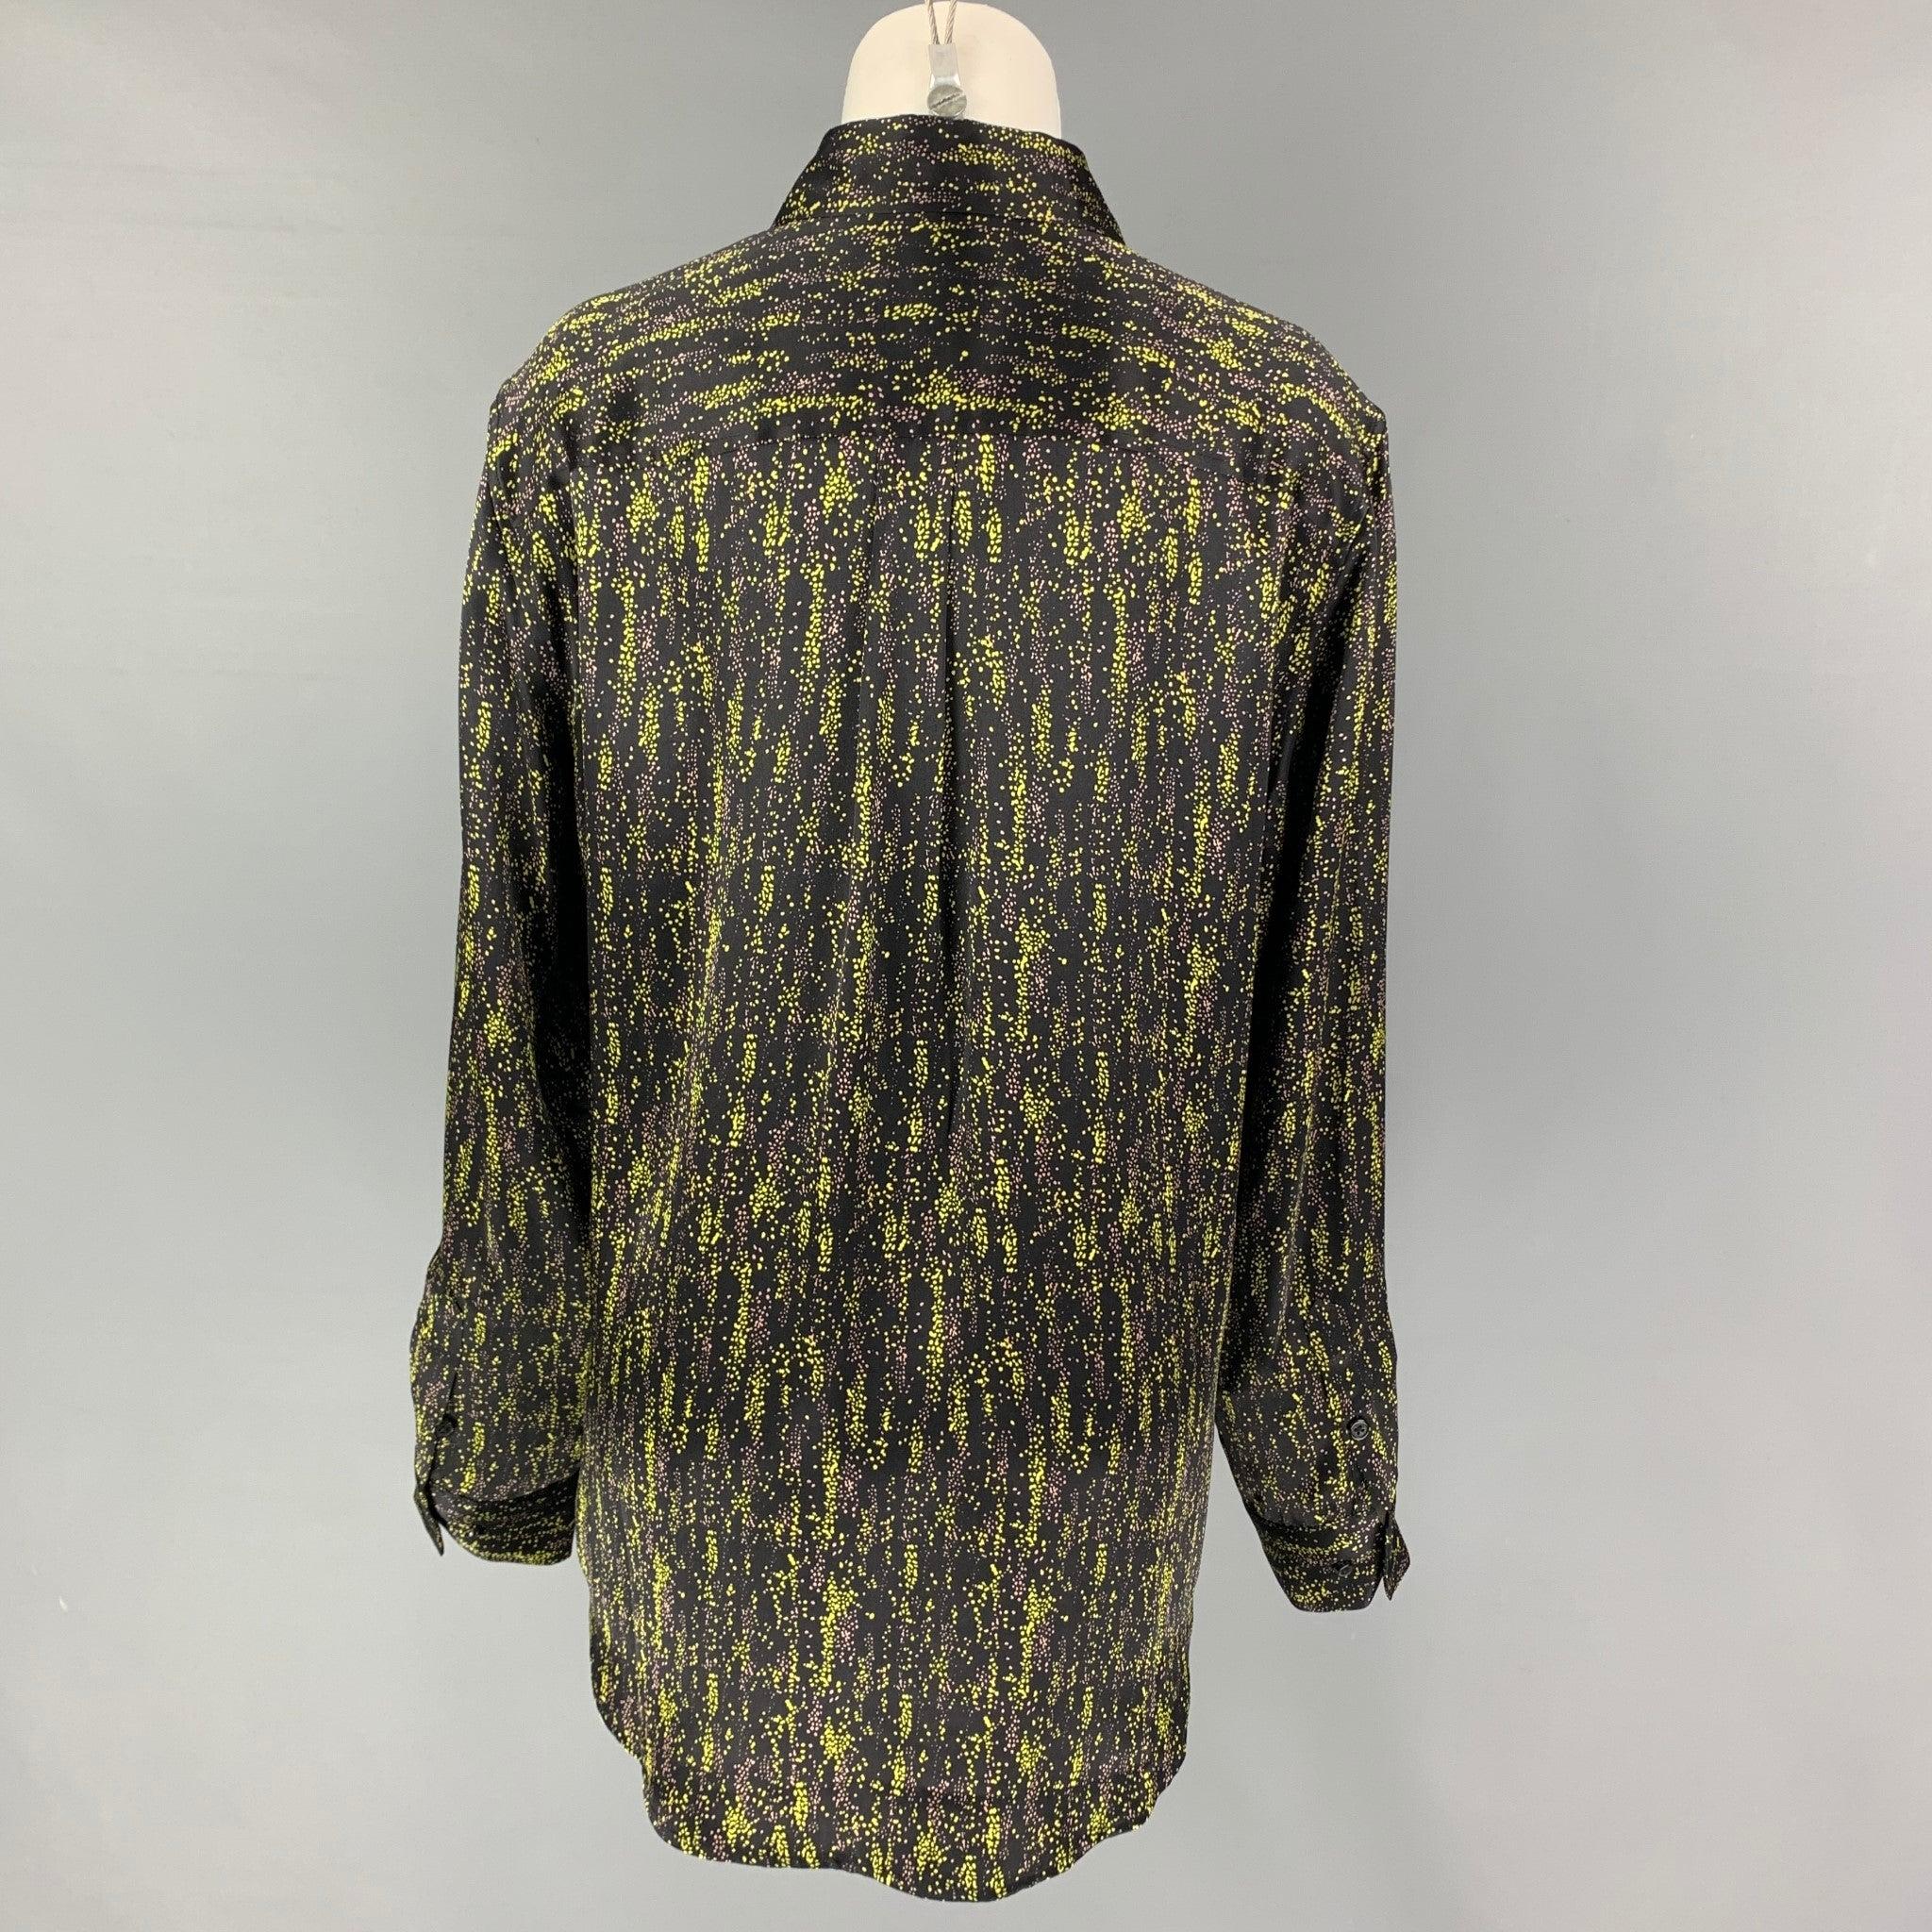 EQUIPMENT FEMME Size L Black Green Print Button Up Shirt In Good Condition For Sale In San Francisco, CA